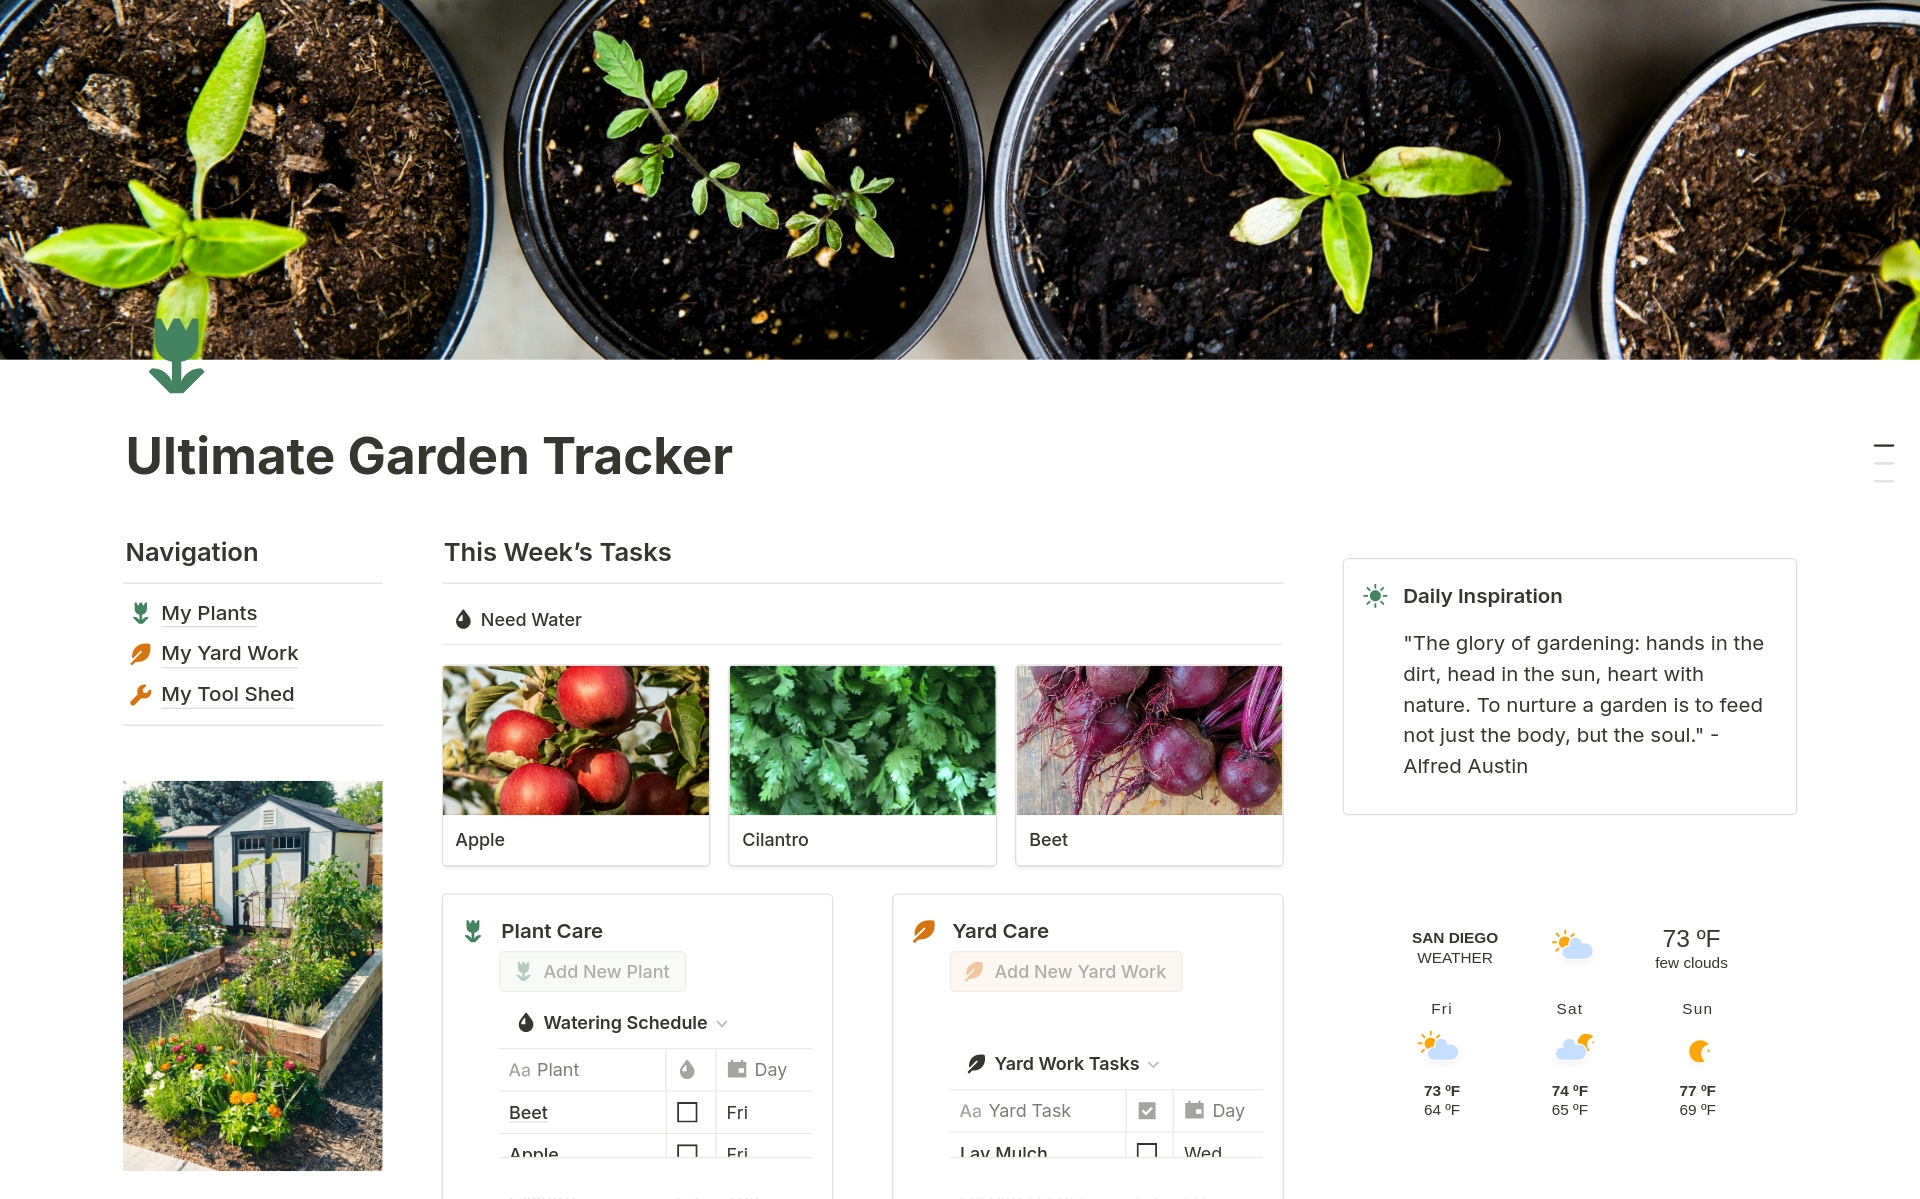 The Ultimate Garden Tracker is your go-to tool for organizing every part of your garden & yard!
